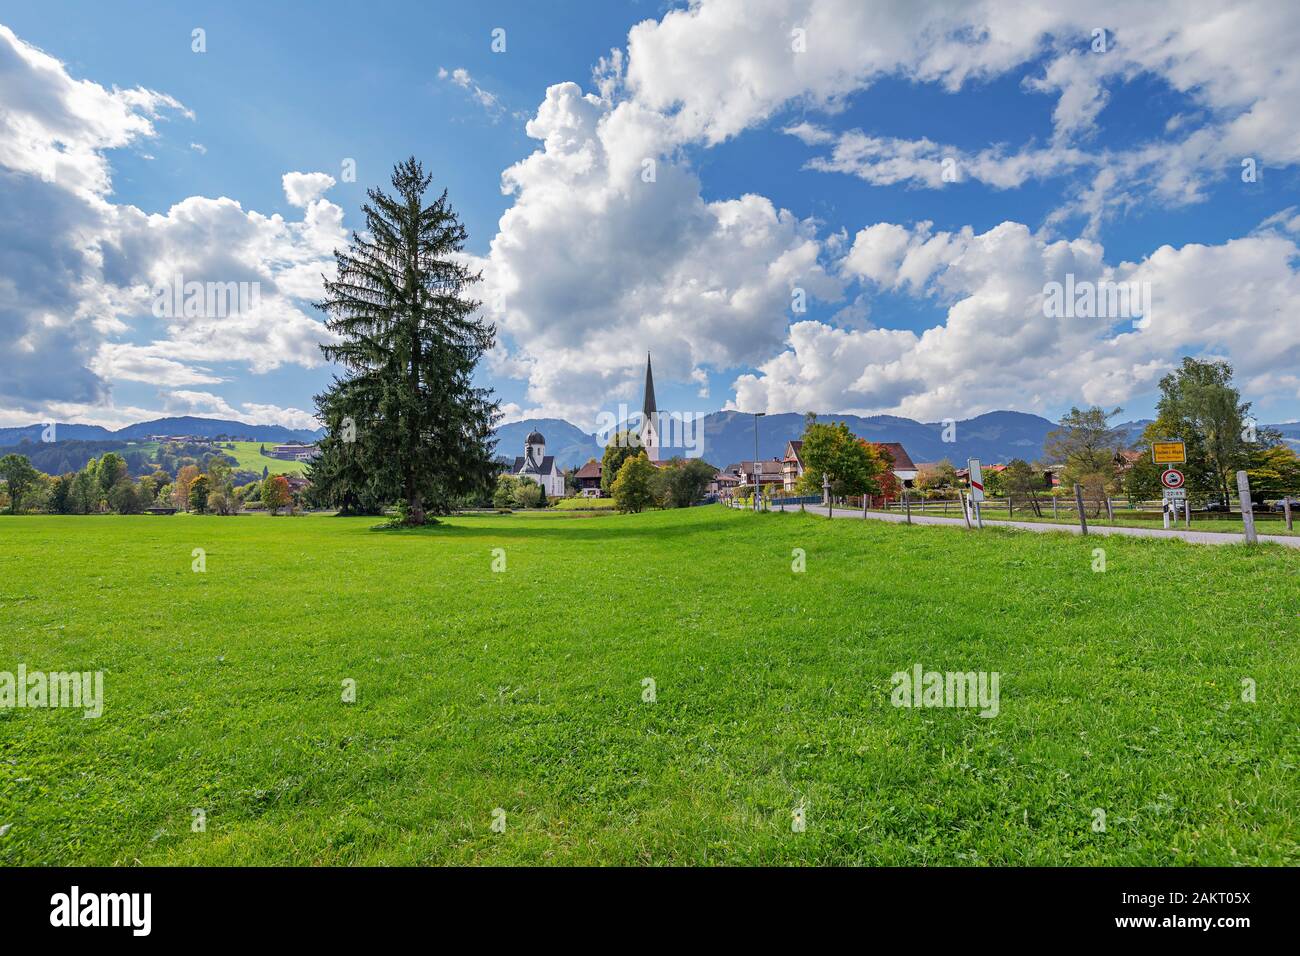 Fischen - View from meadows to Village of Fischen with View to chapel and parish church, Bavaria, Germany, Oberstdorf 25.09.2017 Stock Photo